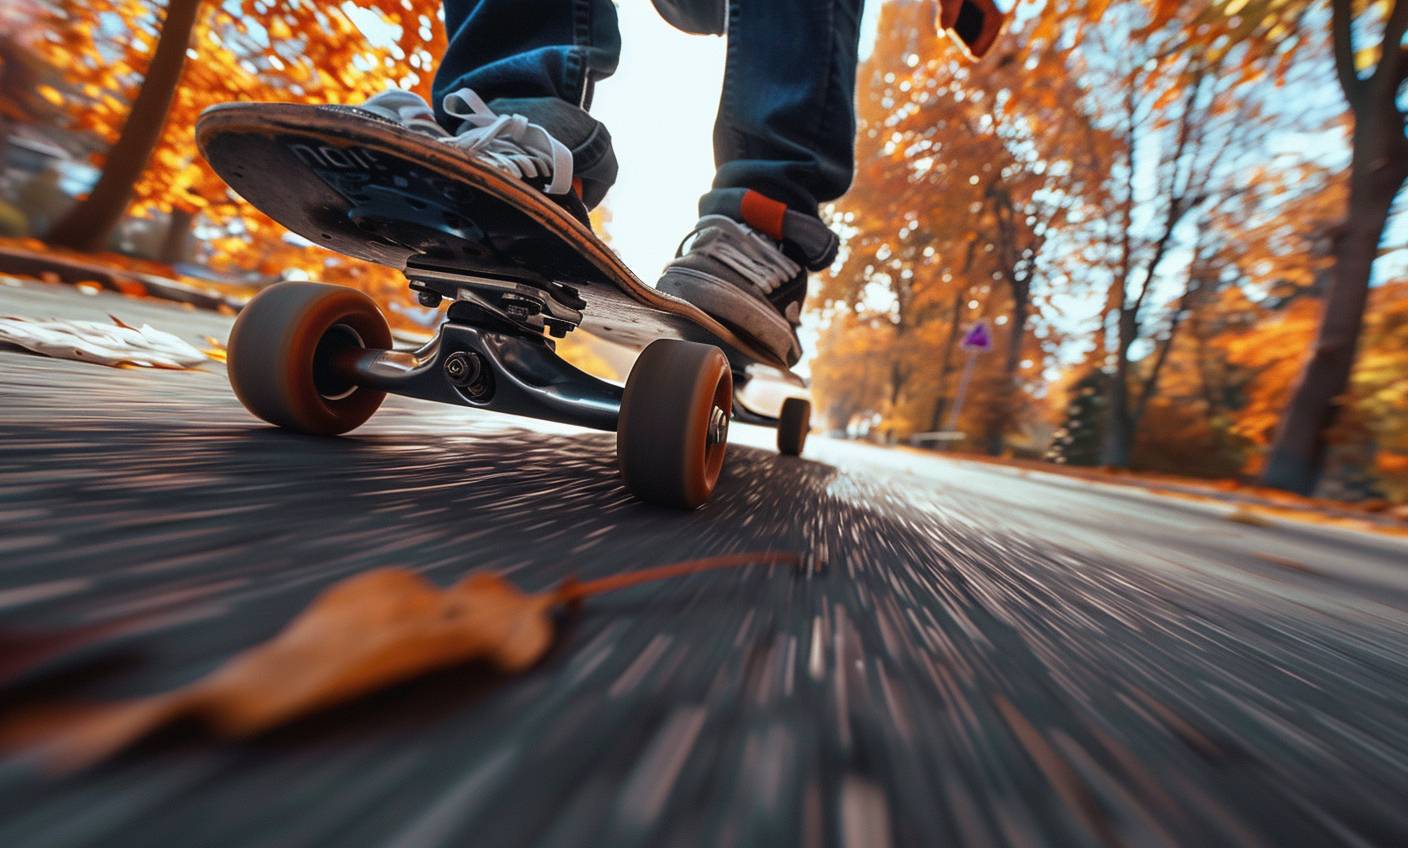 Action photo of downhill skateboarding, worms eye view